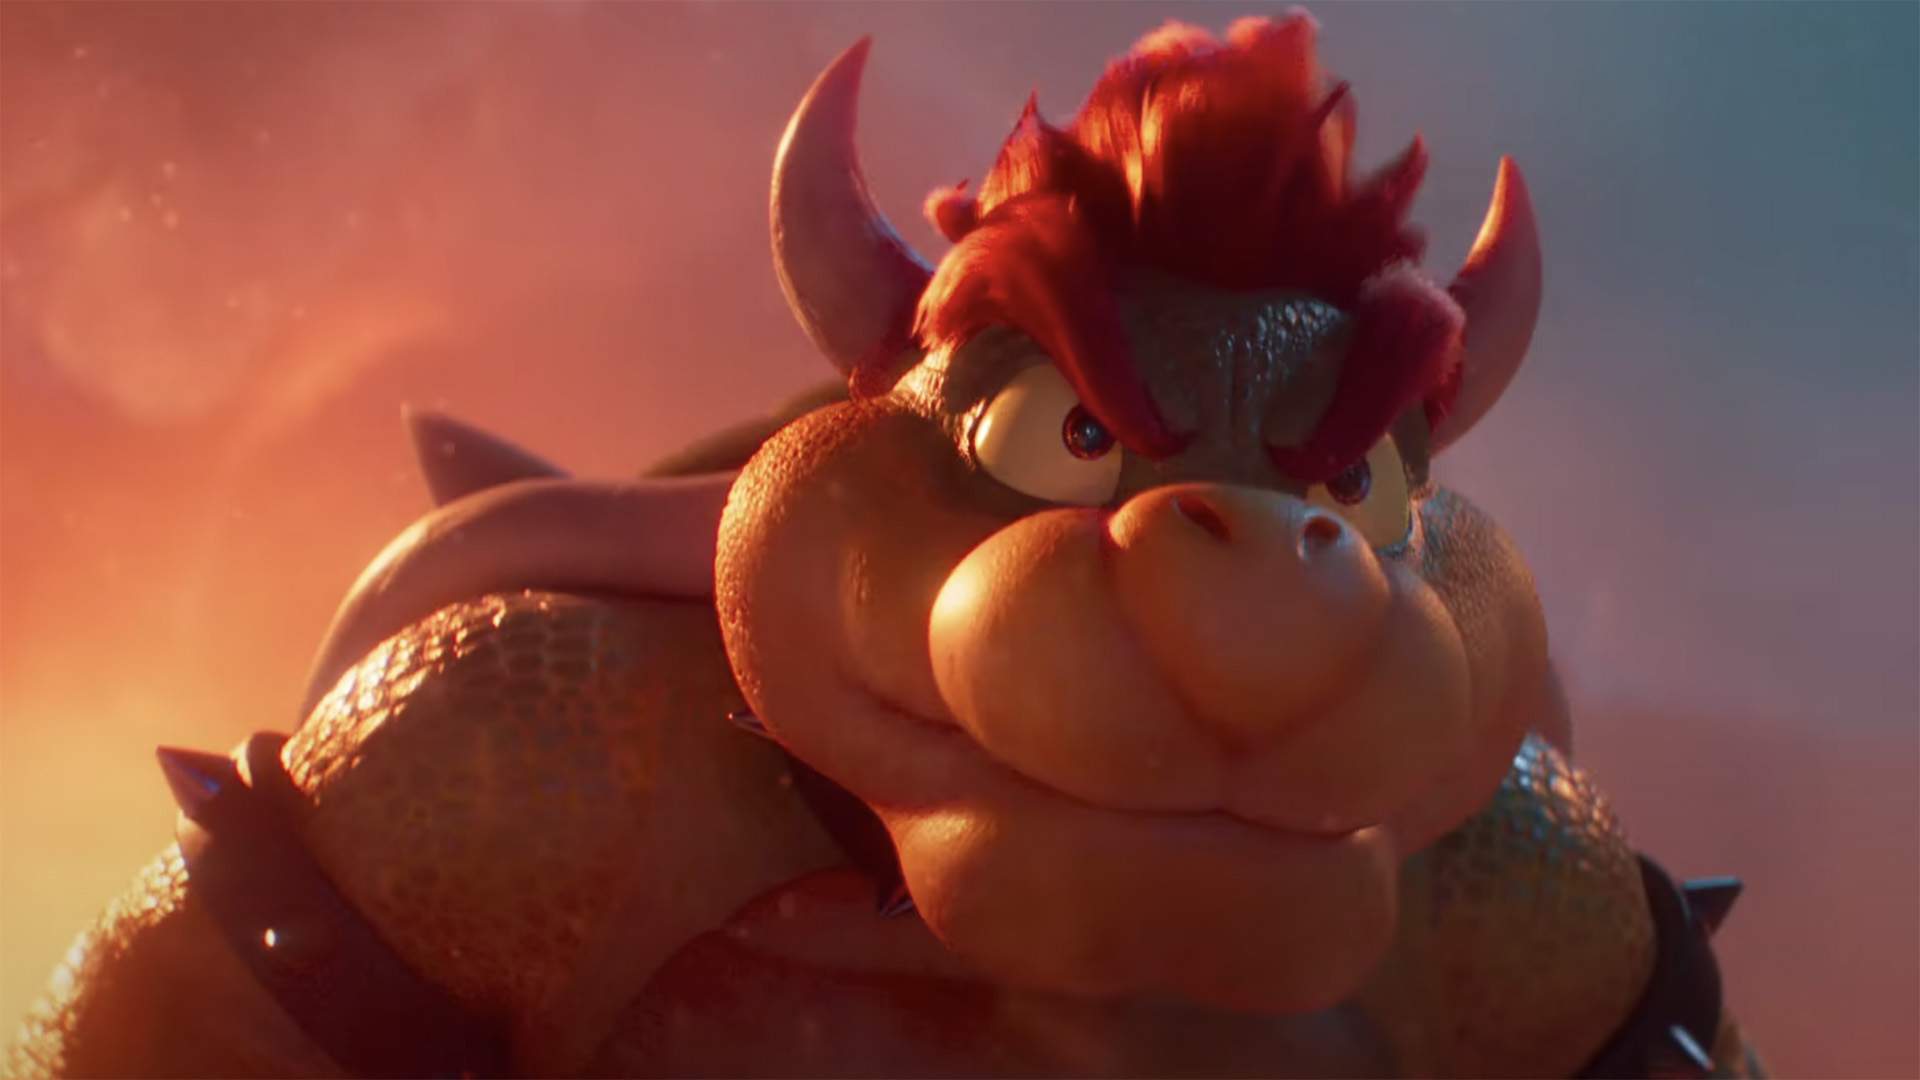 "Mushroom Kingdom, Here We Come": The First Trailer for 'The Super Mario Bros Movie' Is Here